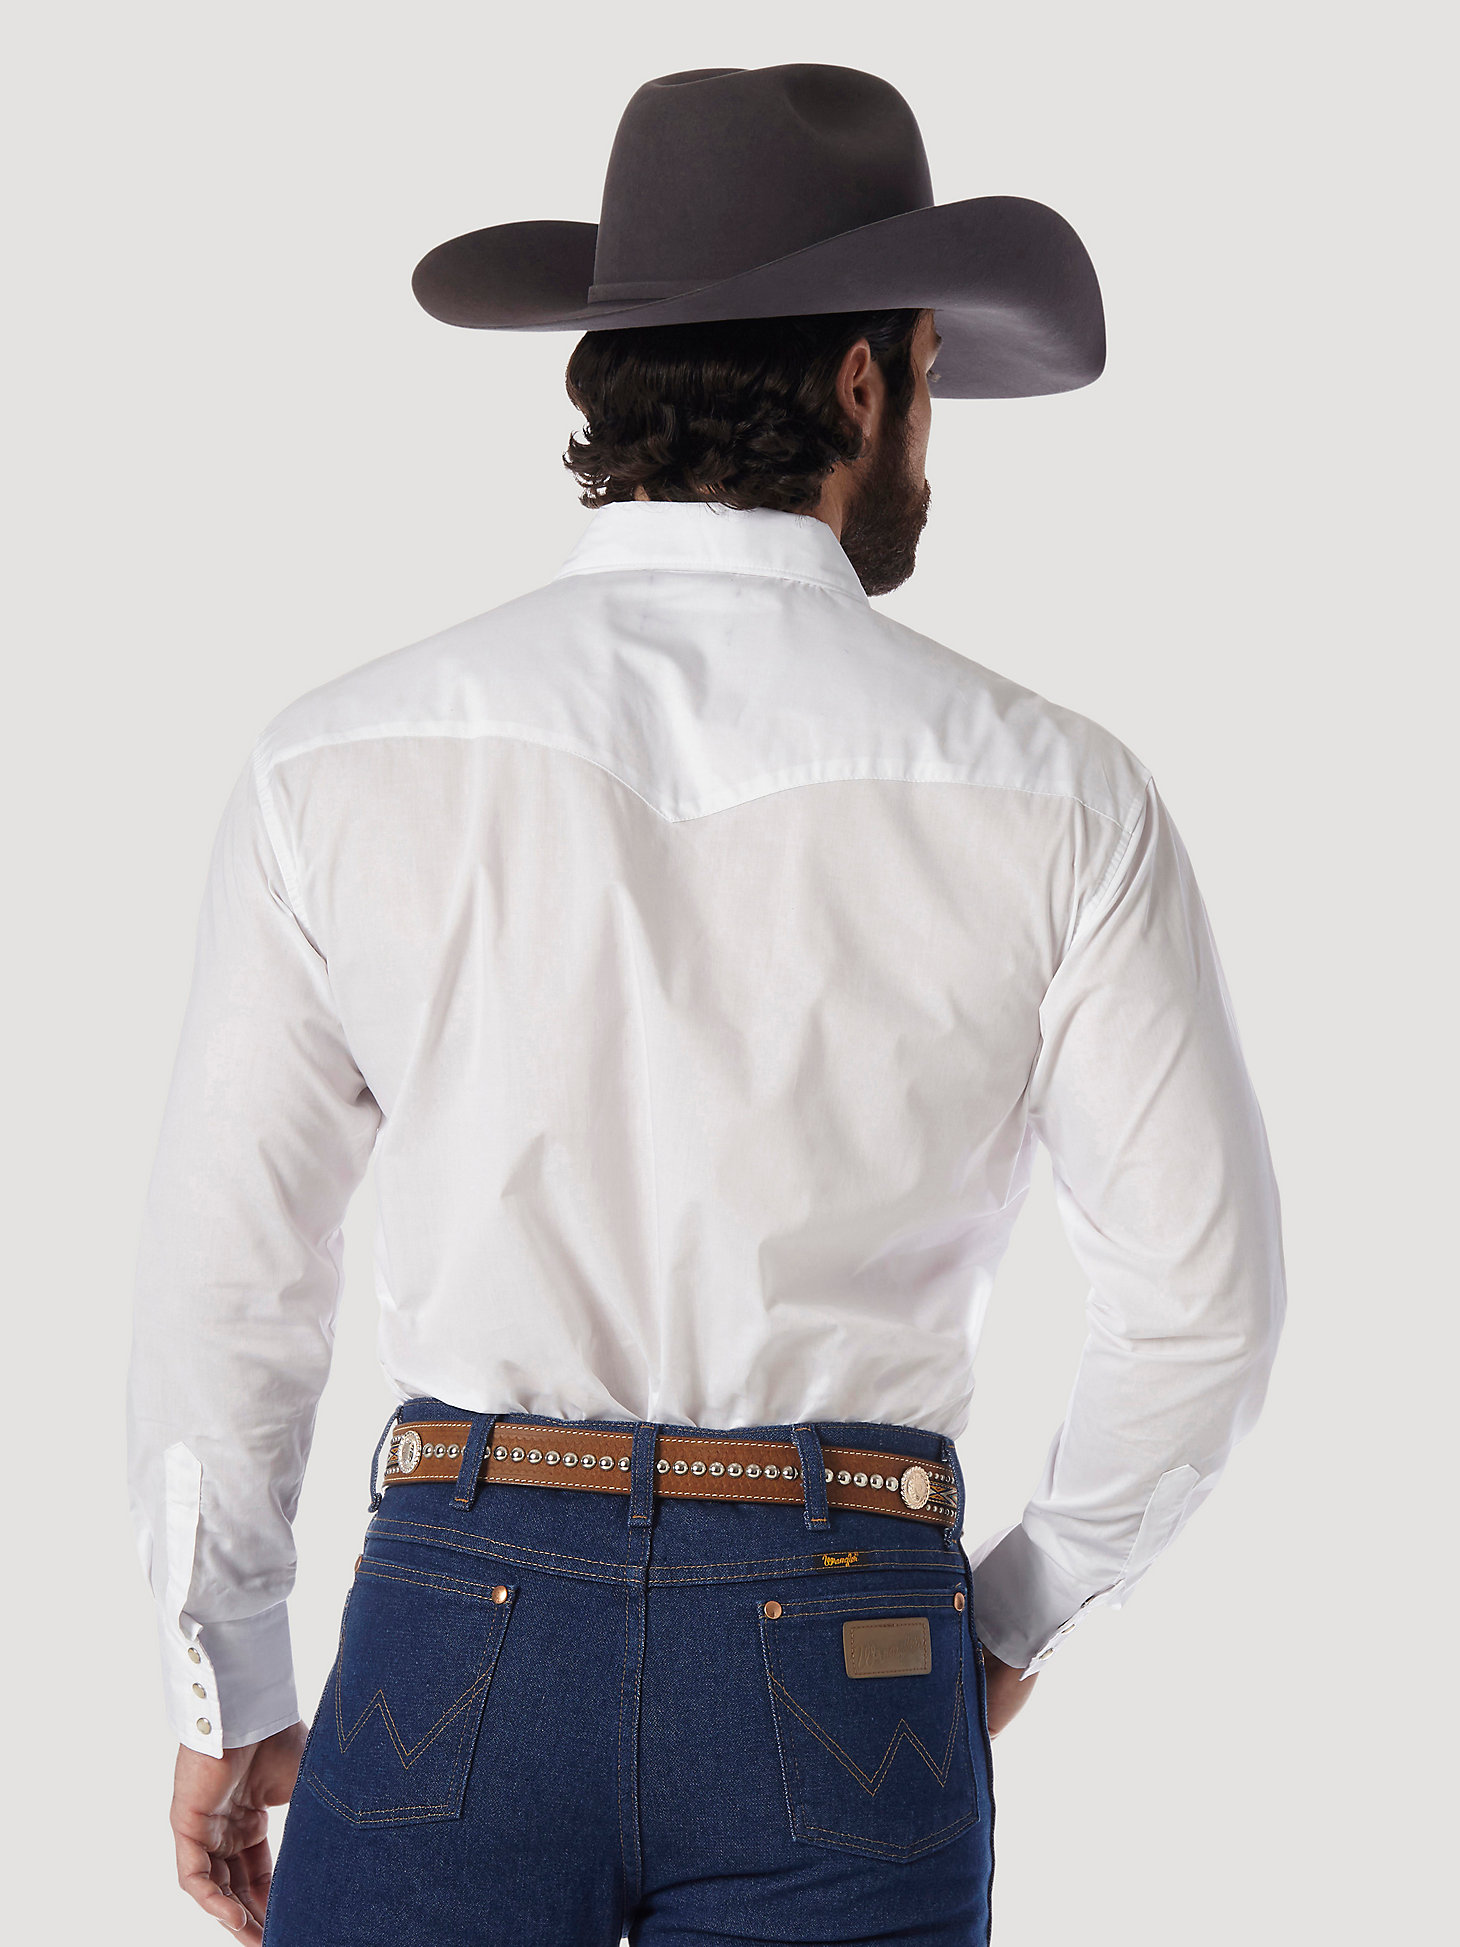 Wrangler® Western Snap Shirt - Long Sleeve Solid Broadcloth in White alternative view 1